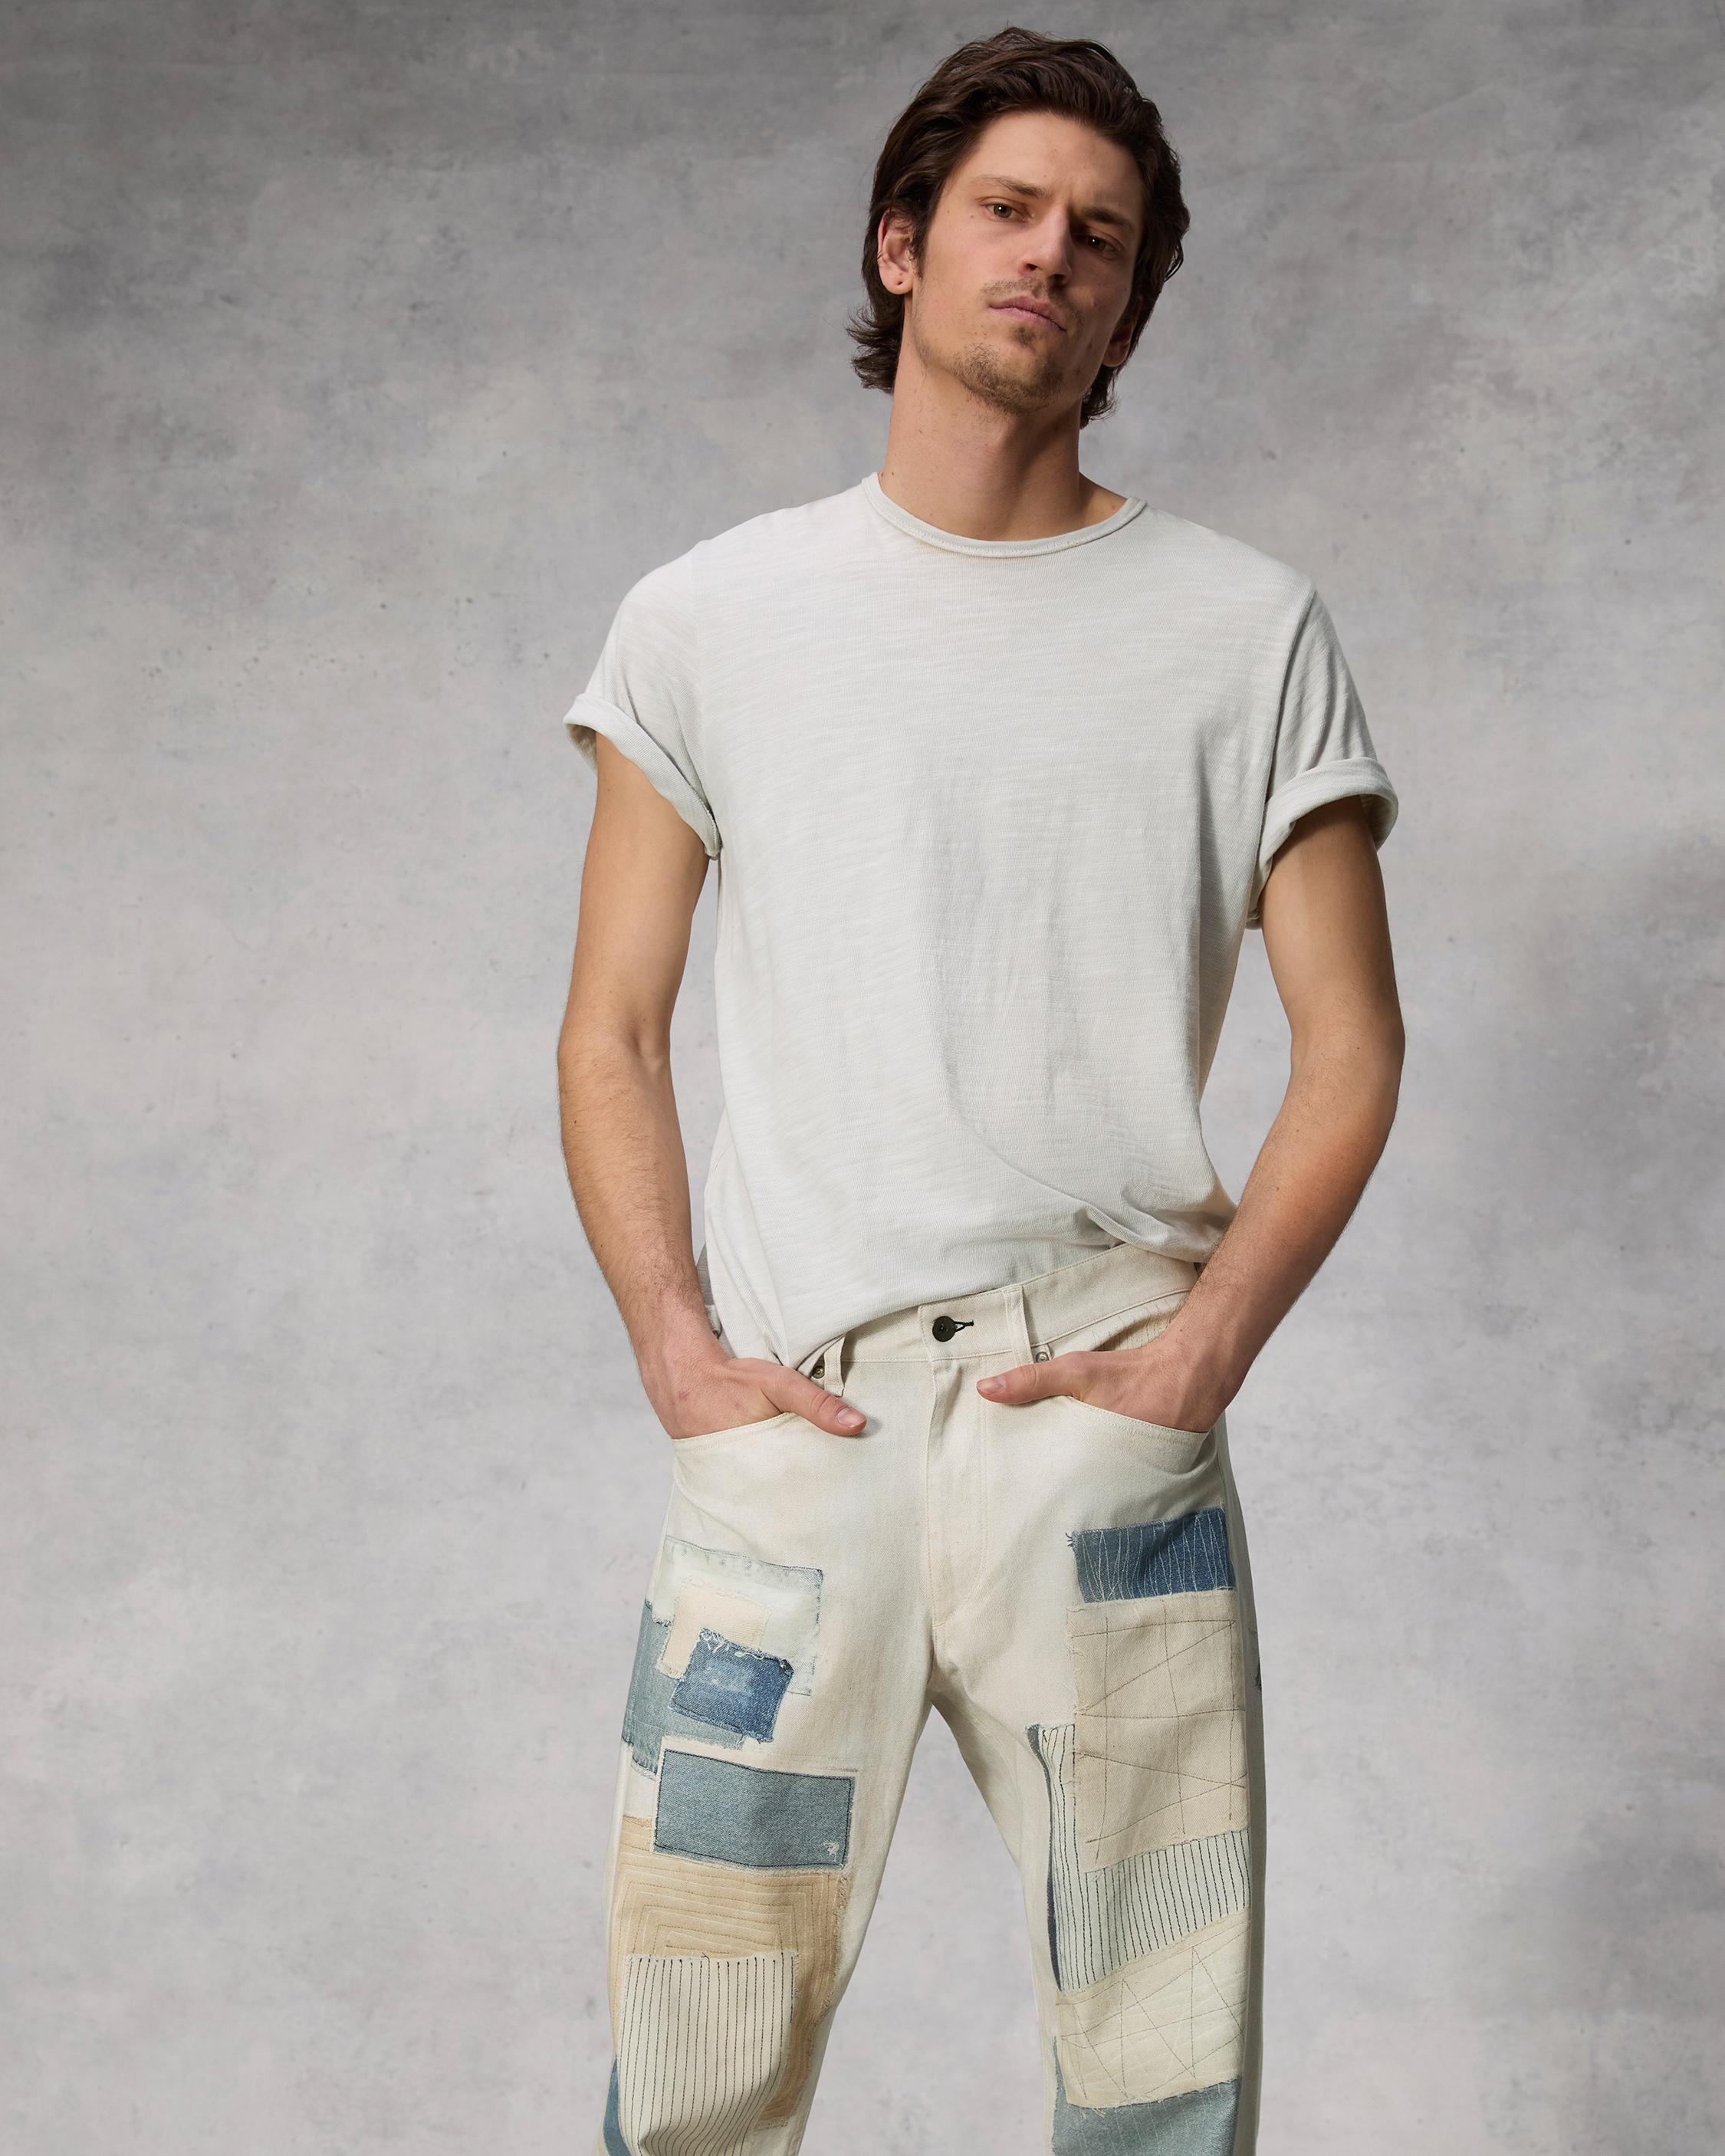 Fit 4 Miramar Canvas Pant
Relaxed Fit - 7